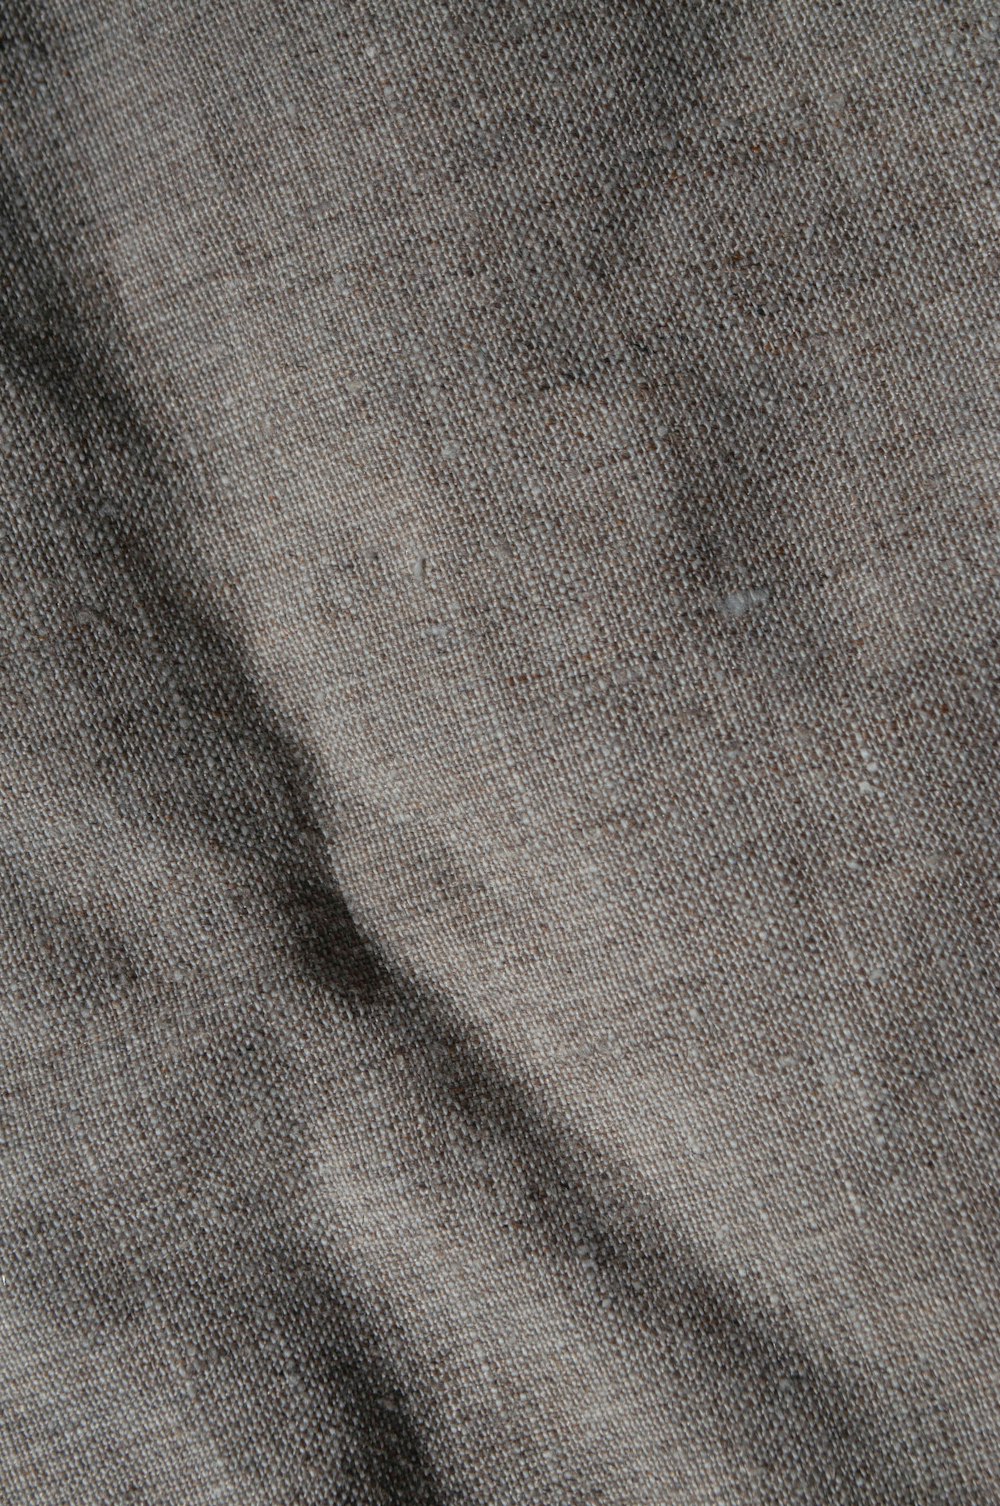 a close up view of a gray fabric